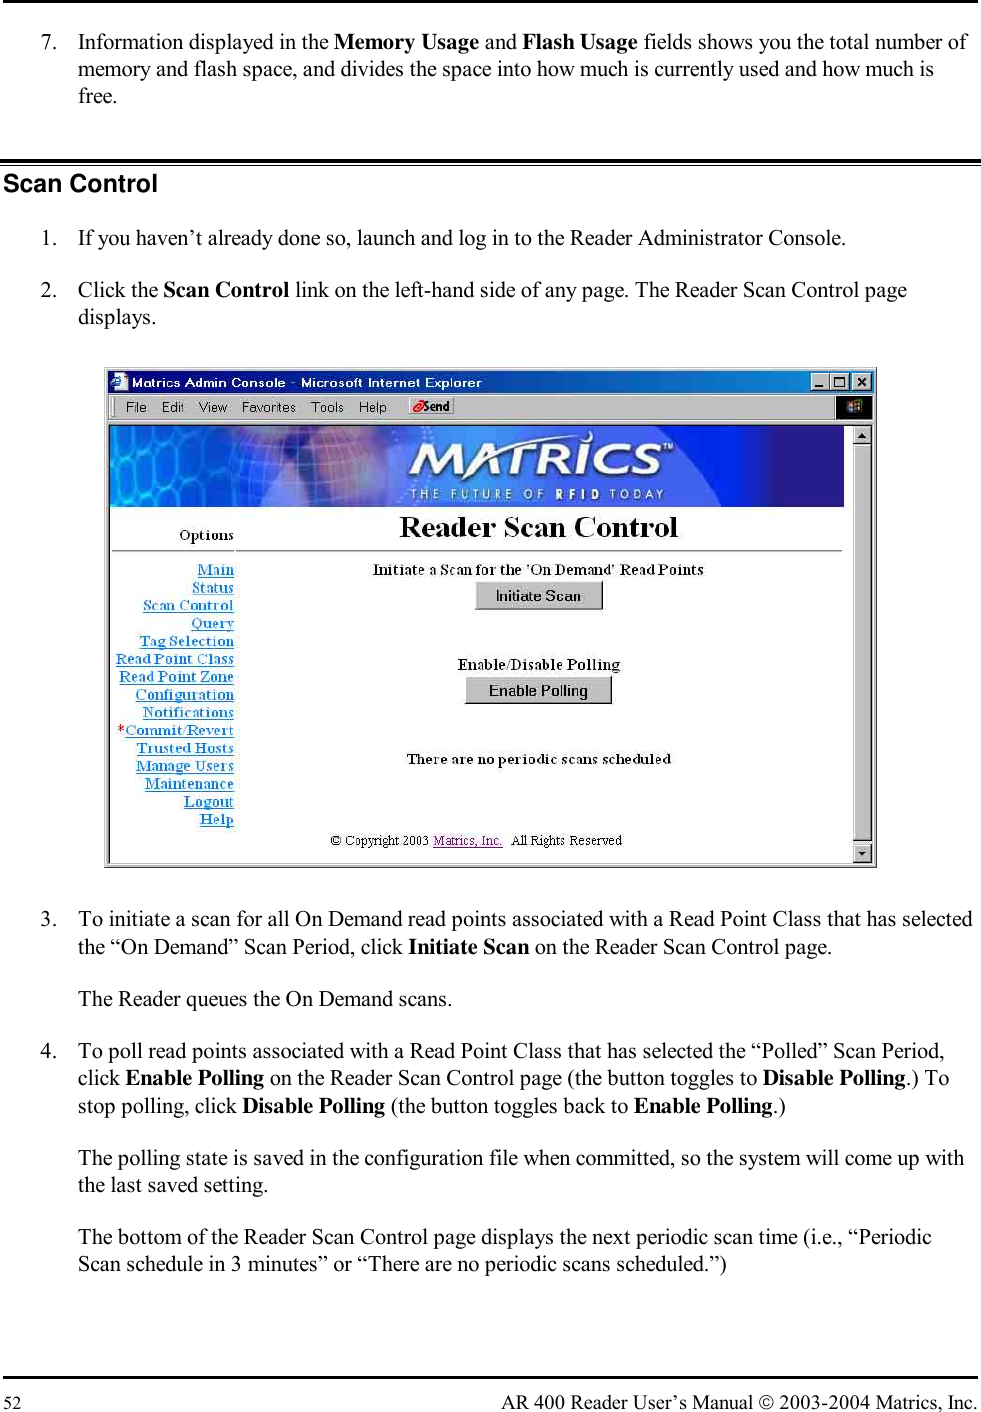  52  AR 400 Reader User’s Manual  2003-2004 Matrics, Inc. 7.  Information displayed in the Memory Usage and Flash Usage fields shows you the total number of memory and flash space, and divides the space into how much is currently used and how much is free. Scan Control 1.  If you haven’t already done so, launch and log in to the Reader Administrator Console. 2. Click the Scan Control link on the left-hand side of any page. The Reader Scan Control page displays.  3.  To initiate a scan for all On Demand read points associated with a Read Point Class that has selected the “On Demand” Scan Period, click Initiate Scan on the Reader Scan Control page. The Reader queues the On Demand scans. 4.  To poll read points associated with a Read Point Class that has selected the “Polled” Scan Period, click Enable Polling on the Reader Scan Control page (the button toggles to Disable Polling.) To stop polling, click Disable Polling (the button toggles back to Enable Polling.) The polling state is saved in the configuration file when committed, so the system will come up with the last saved setting. The bottom of the Reader Scan Control page displays the next periodic scan time (i.e., “Periodic Scan schedule in 3 minutes” or “There are no periodic scans scheduled.”) 